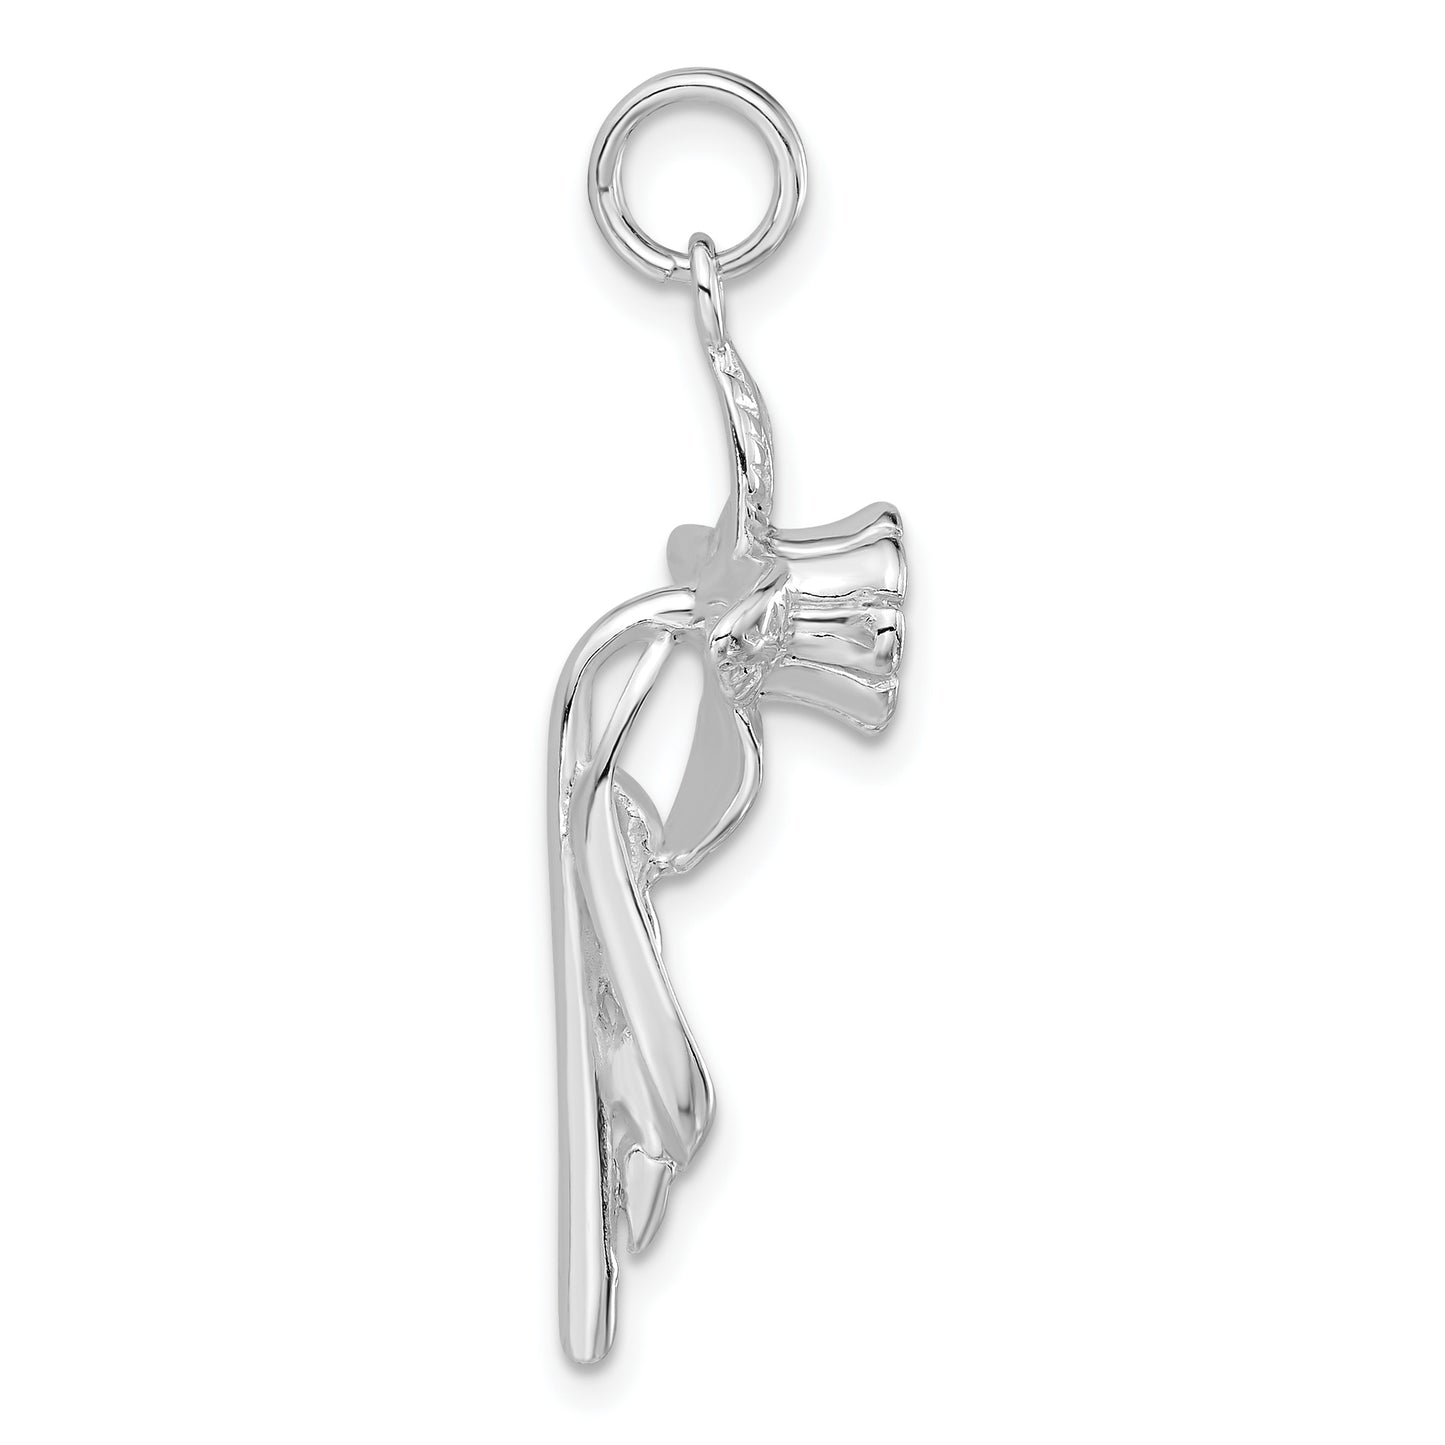 Sterling Silver Polished Flower Cross Charm